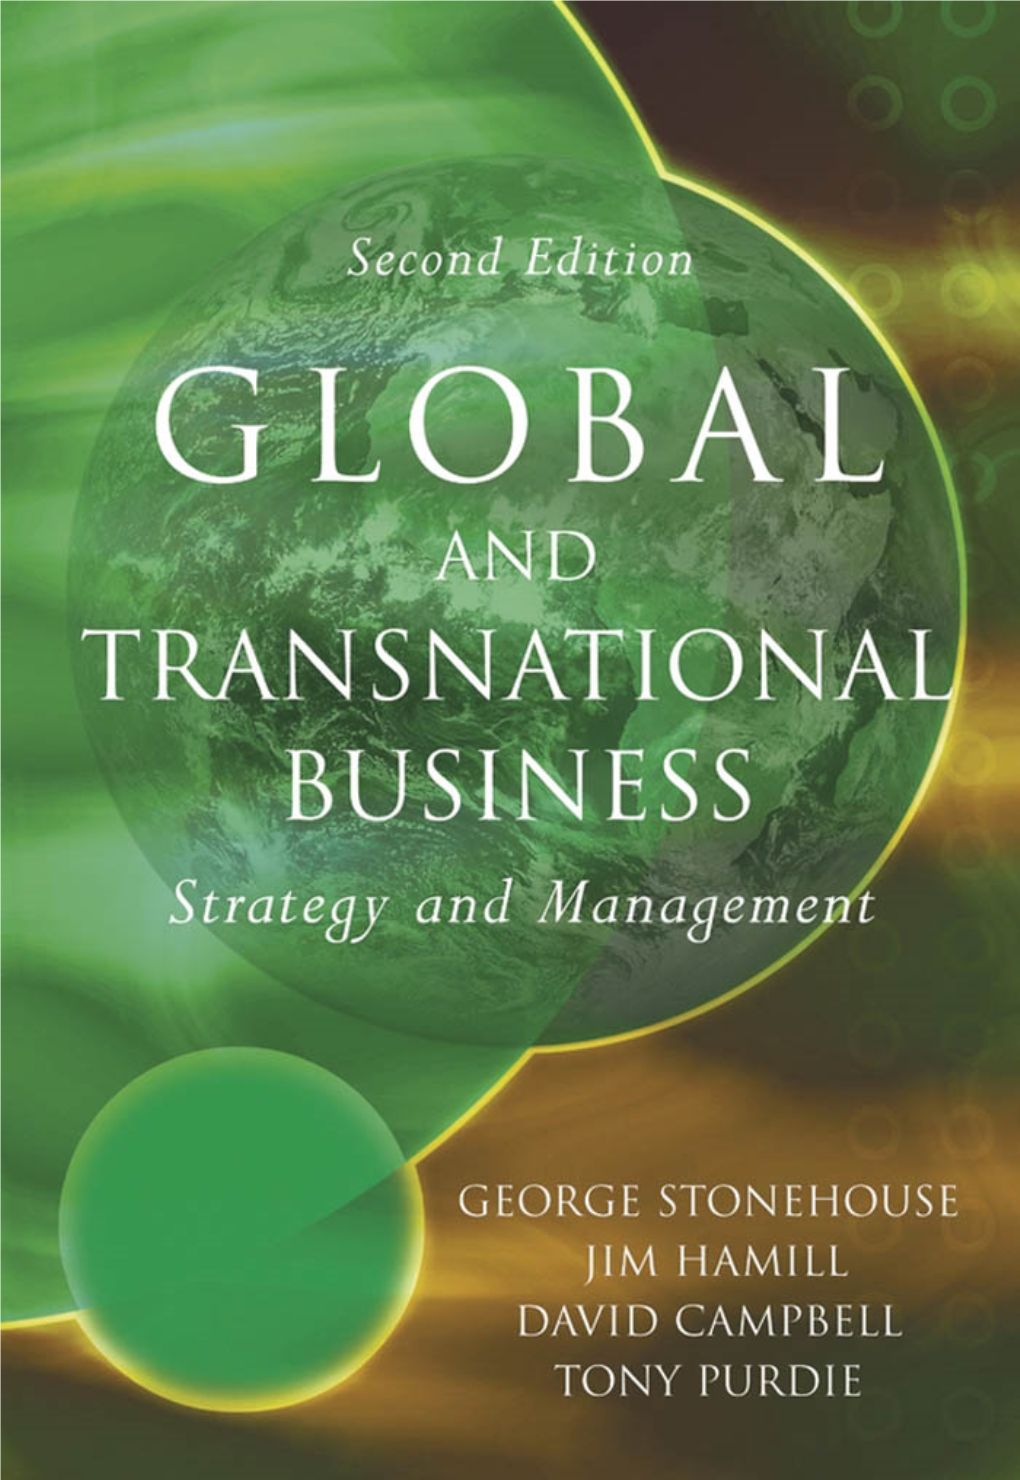 Global and Transnational Business: Strategy and Management Second Edition